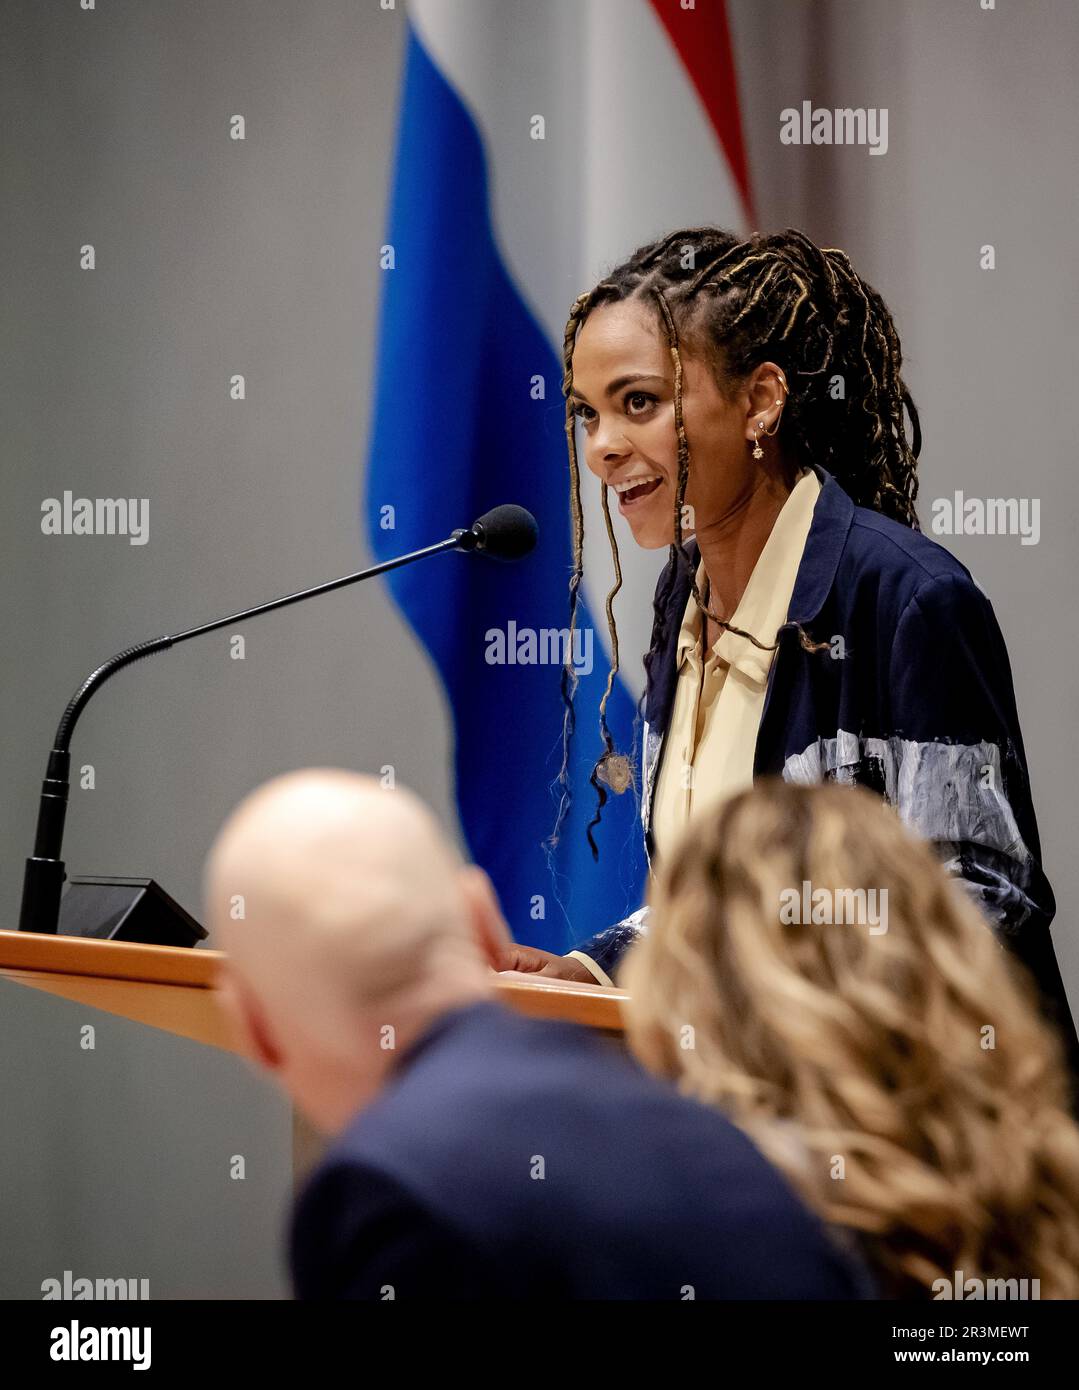 THE HAGUE - Dzifa Kusenuh (Initiator and presenter BNN-VARA) during a debate in the House of Representatives about the citizens' initiative Abortion is not a crime. ANP ROBIN VAN LONKHUIJSEN netherlands out - belgium out Stock Photo